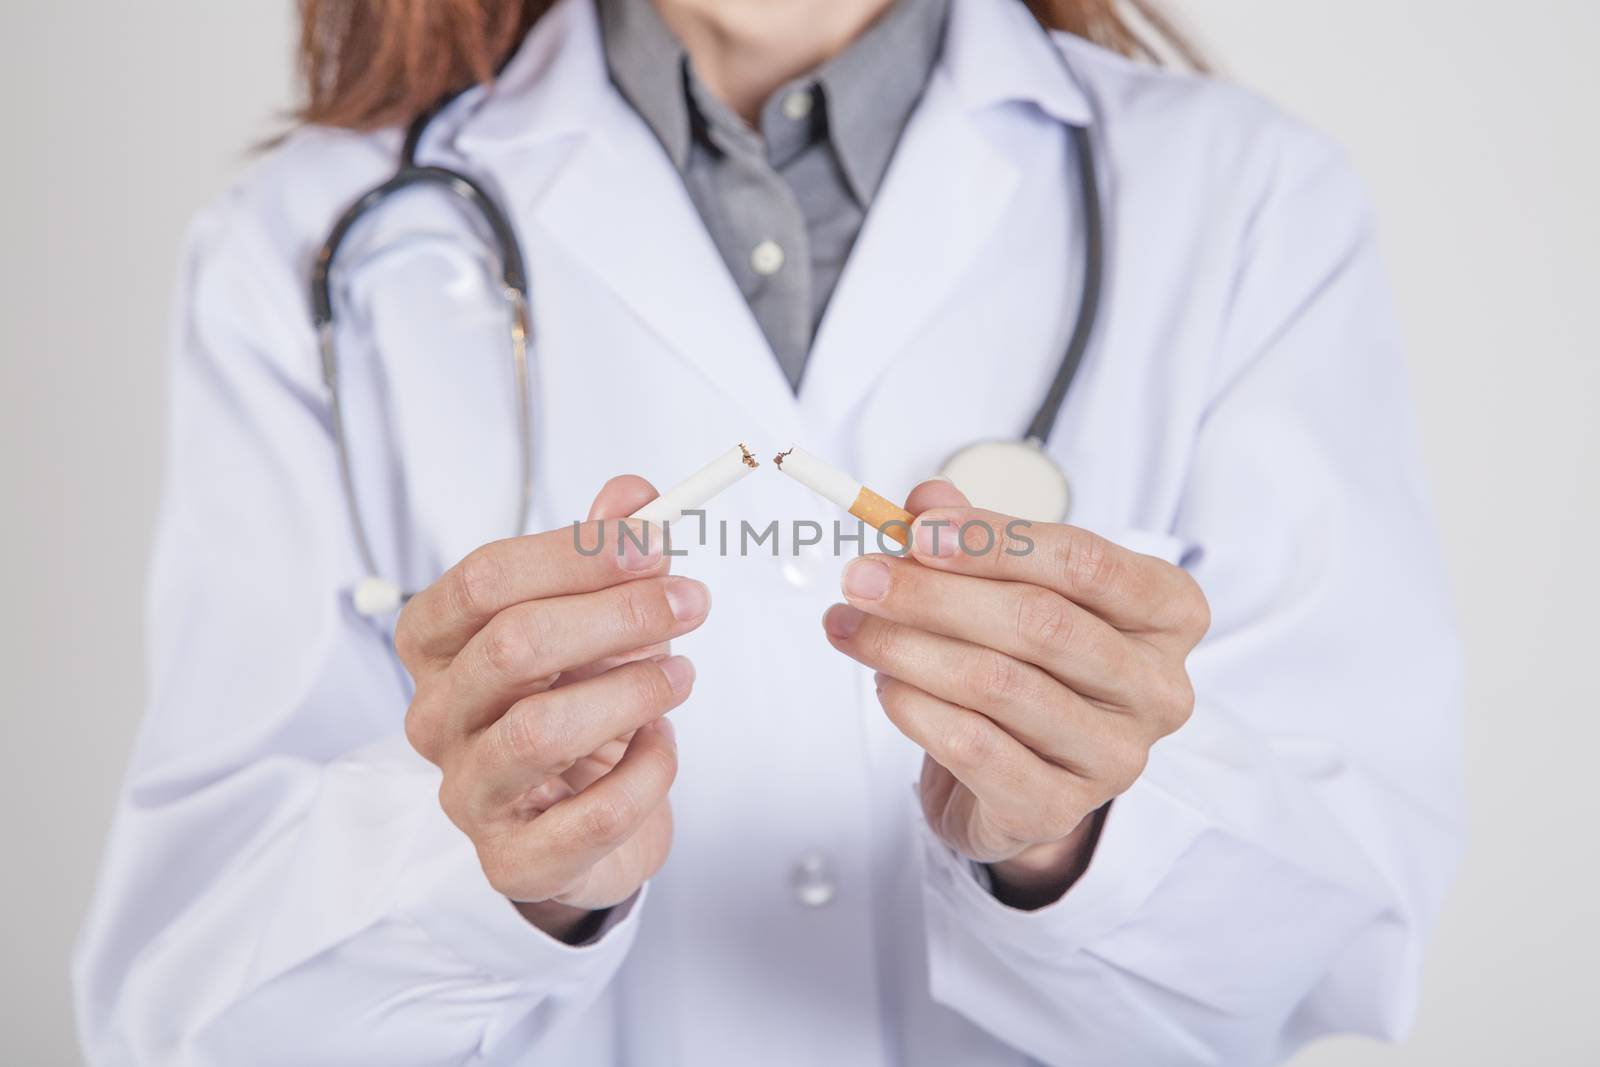 woman doctor with white gown and stethoscope breaking a cigarette tobacco in her hands over white background